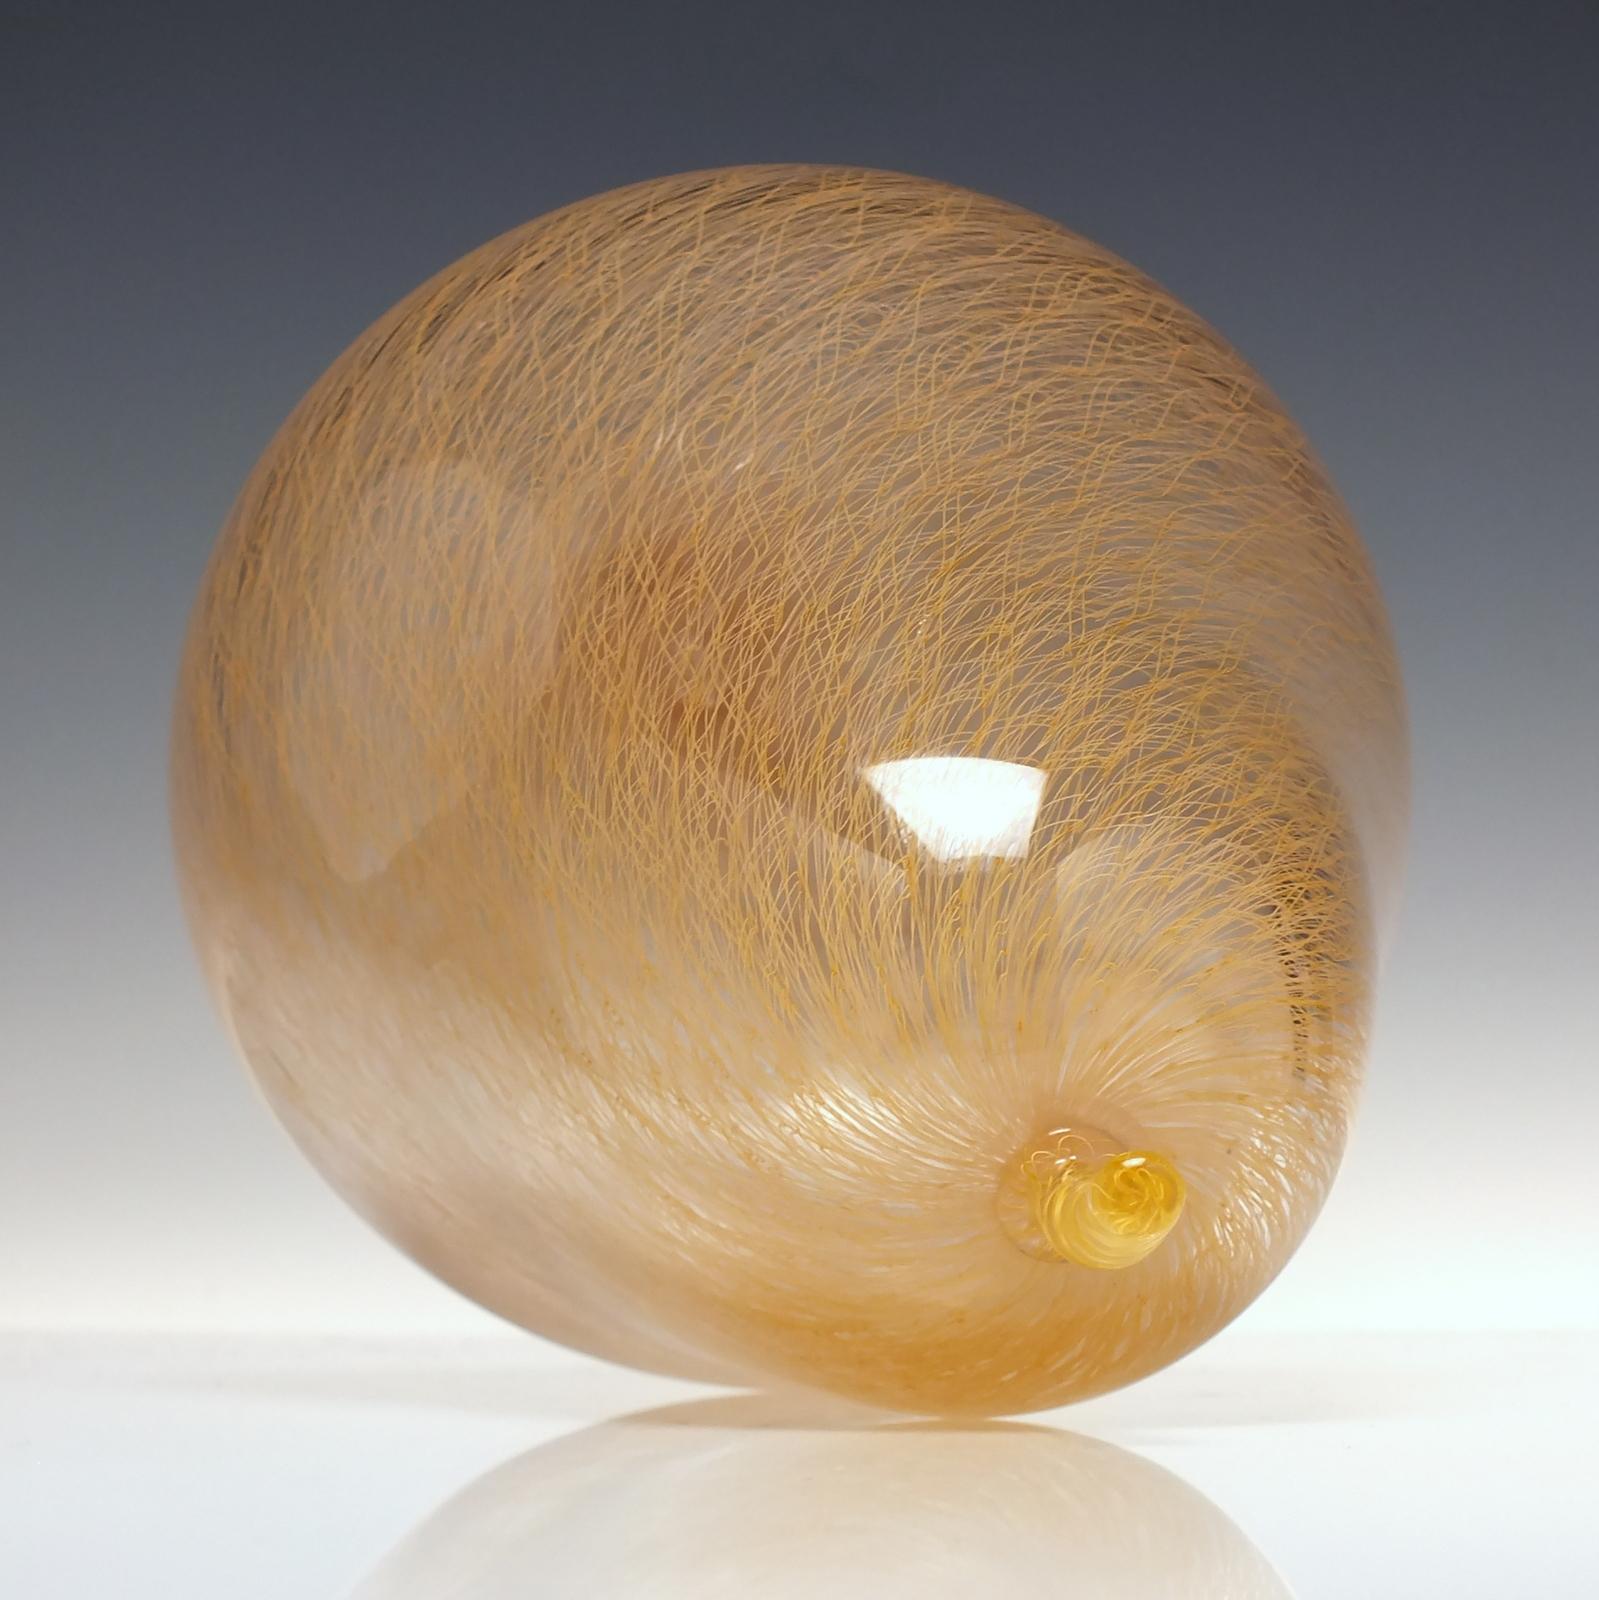 A unique Mike Hunter Merletto Glass Pear dating to 2012.

Merletto, meaning lace in Italian, is a technique in which very thin canes are used to create a very intricate and somewhat organic pattern in the finished piece by utilizing an optic mold